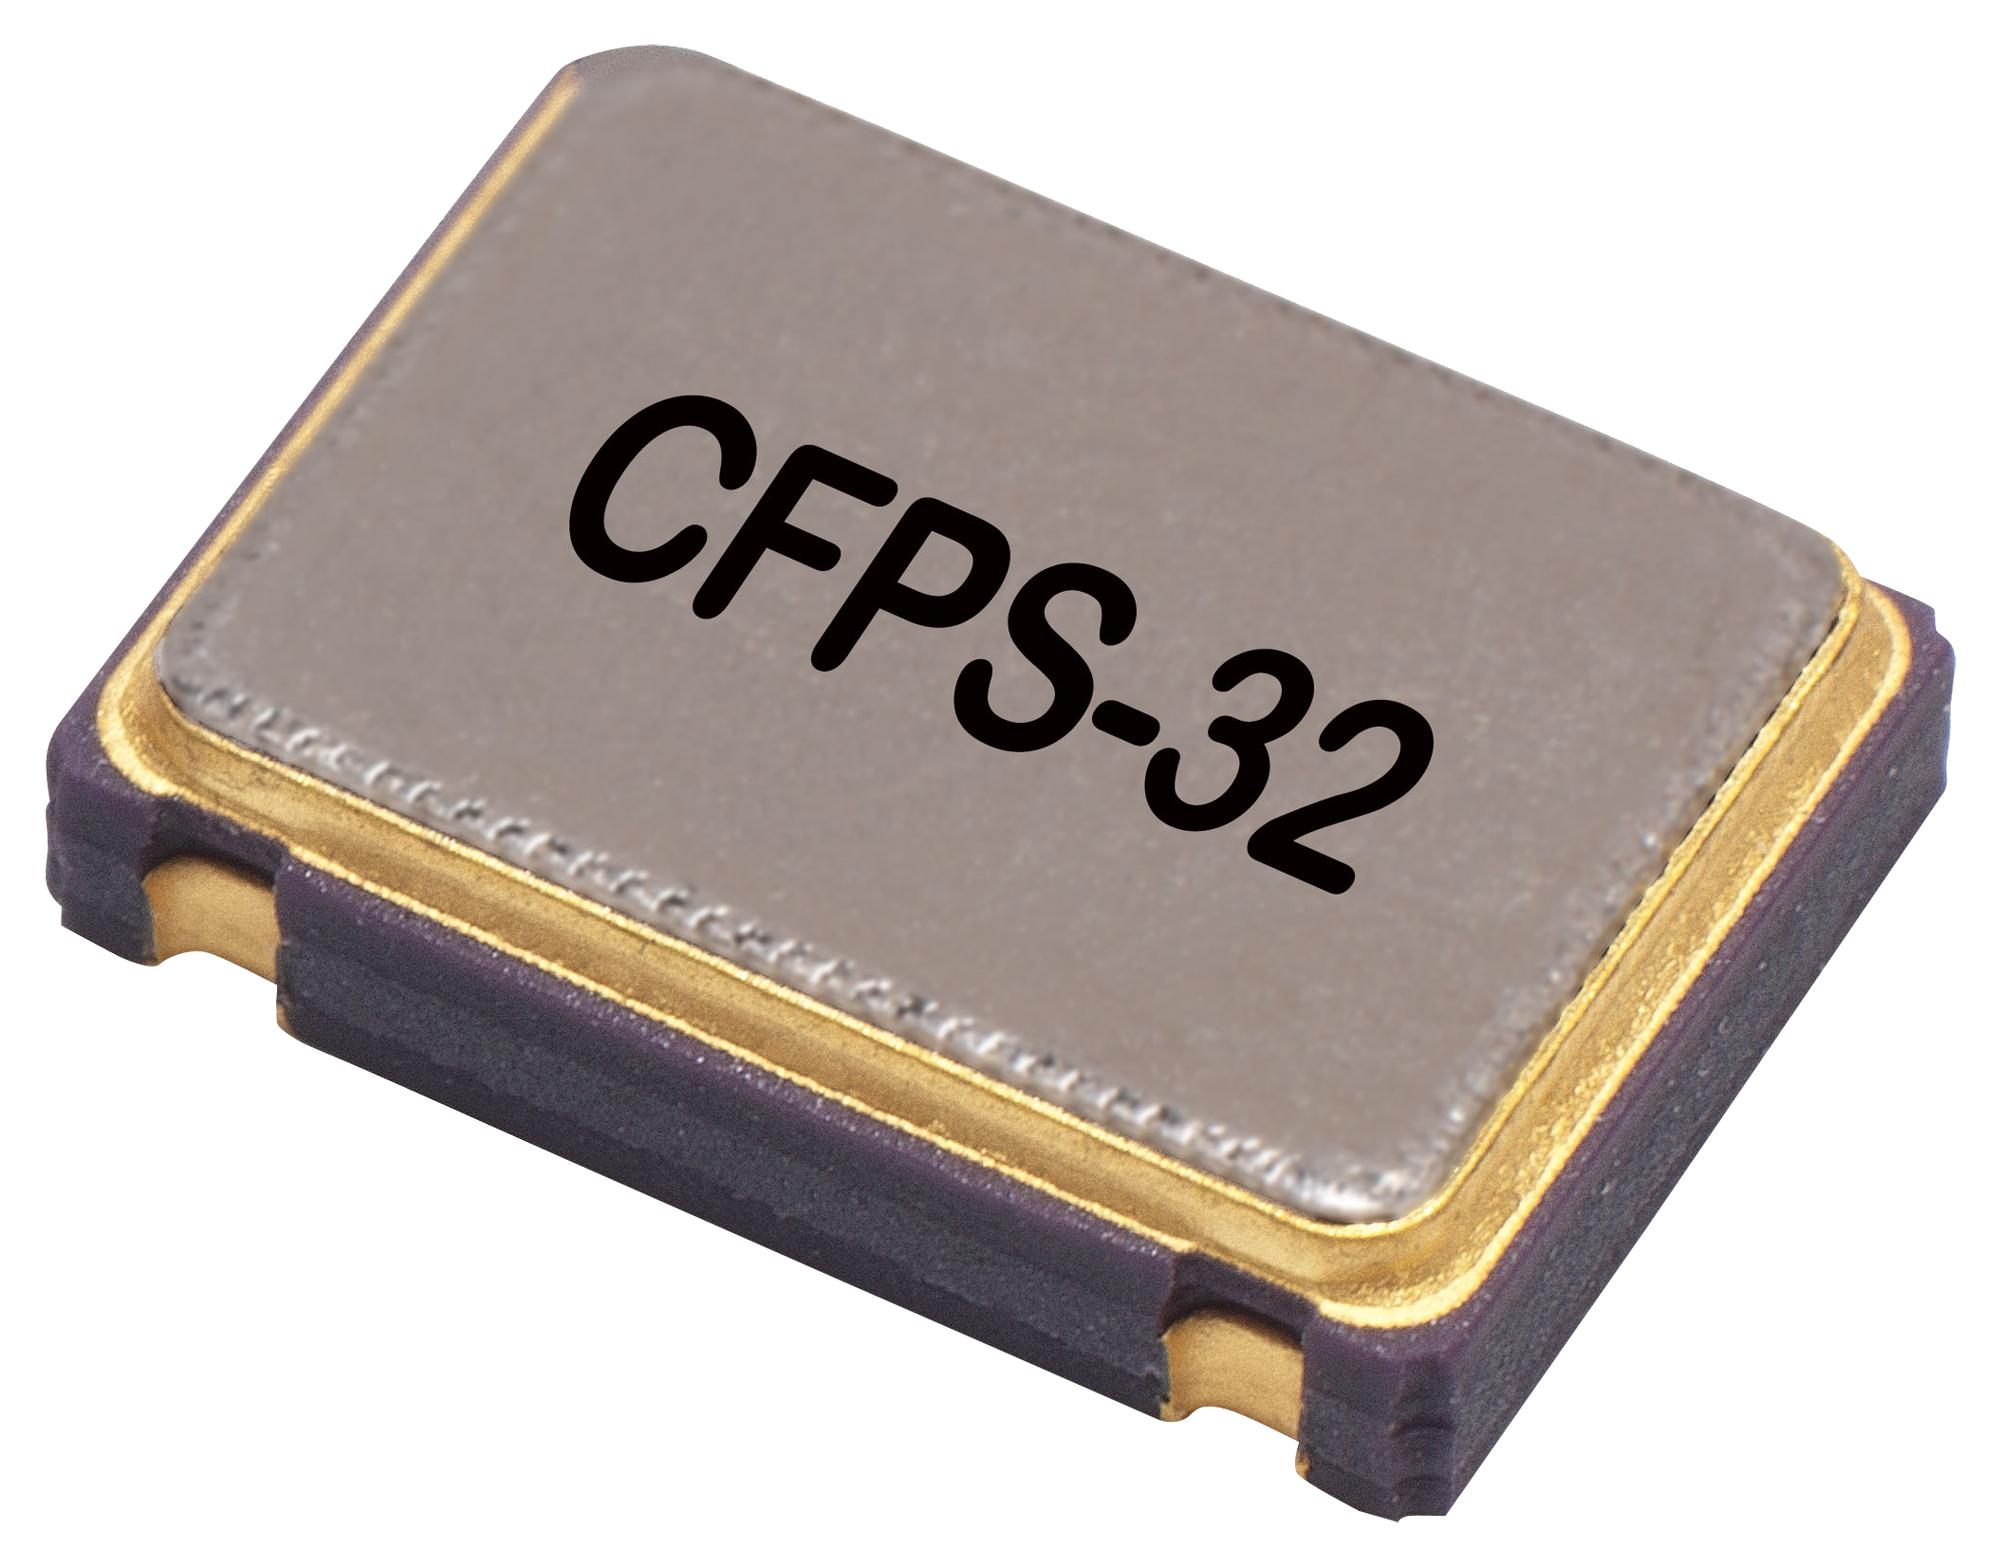 LFSPXO025921 CRYSTAL OSCILLATOR, SMD, 3.6864MHZ IQD FREQUENCY PRODUCTS